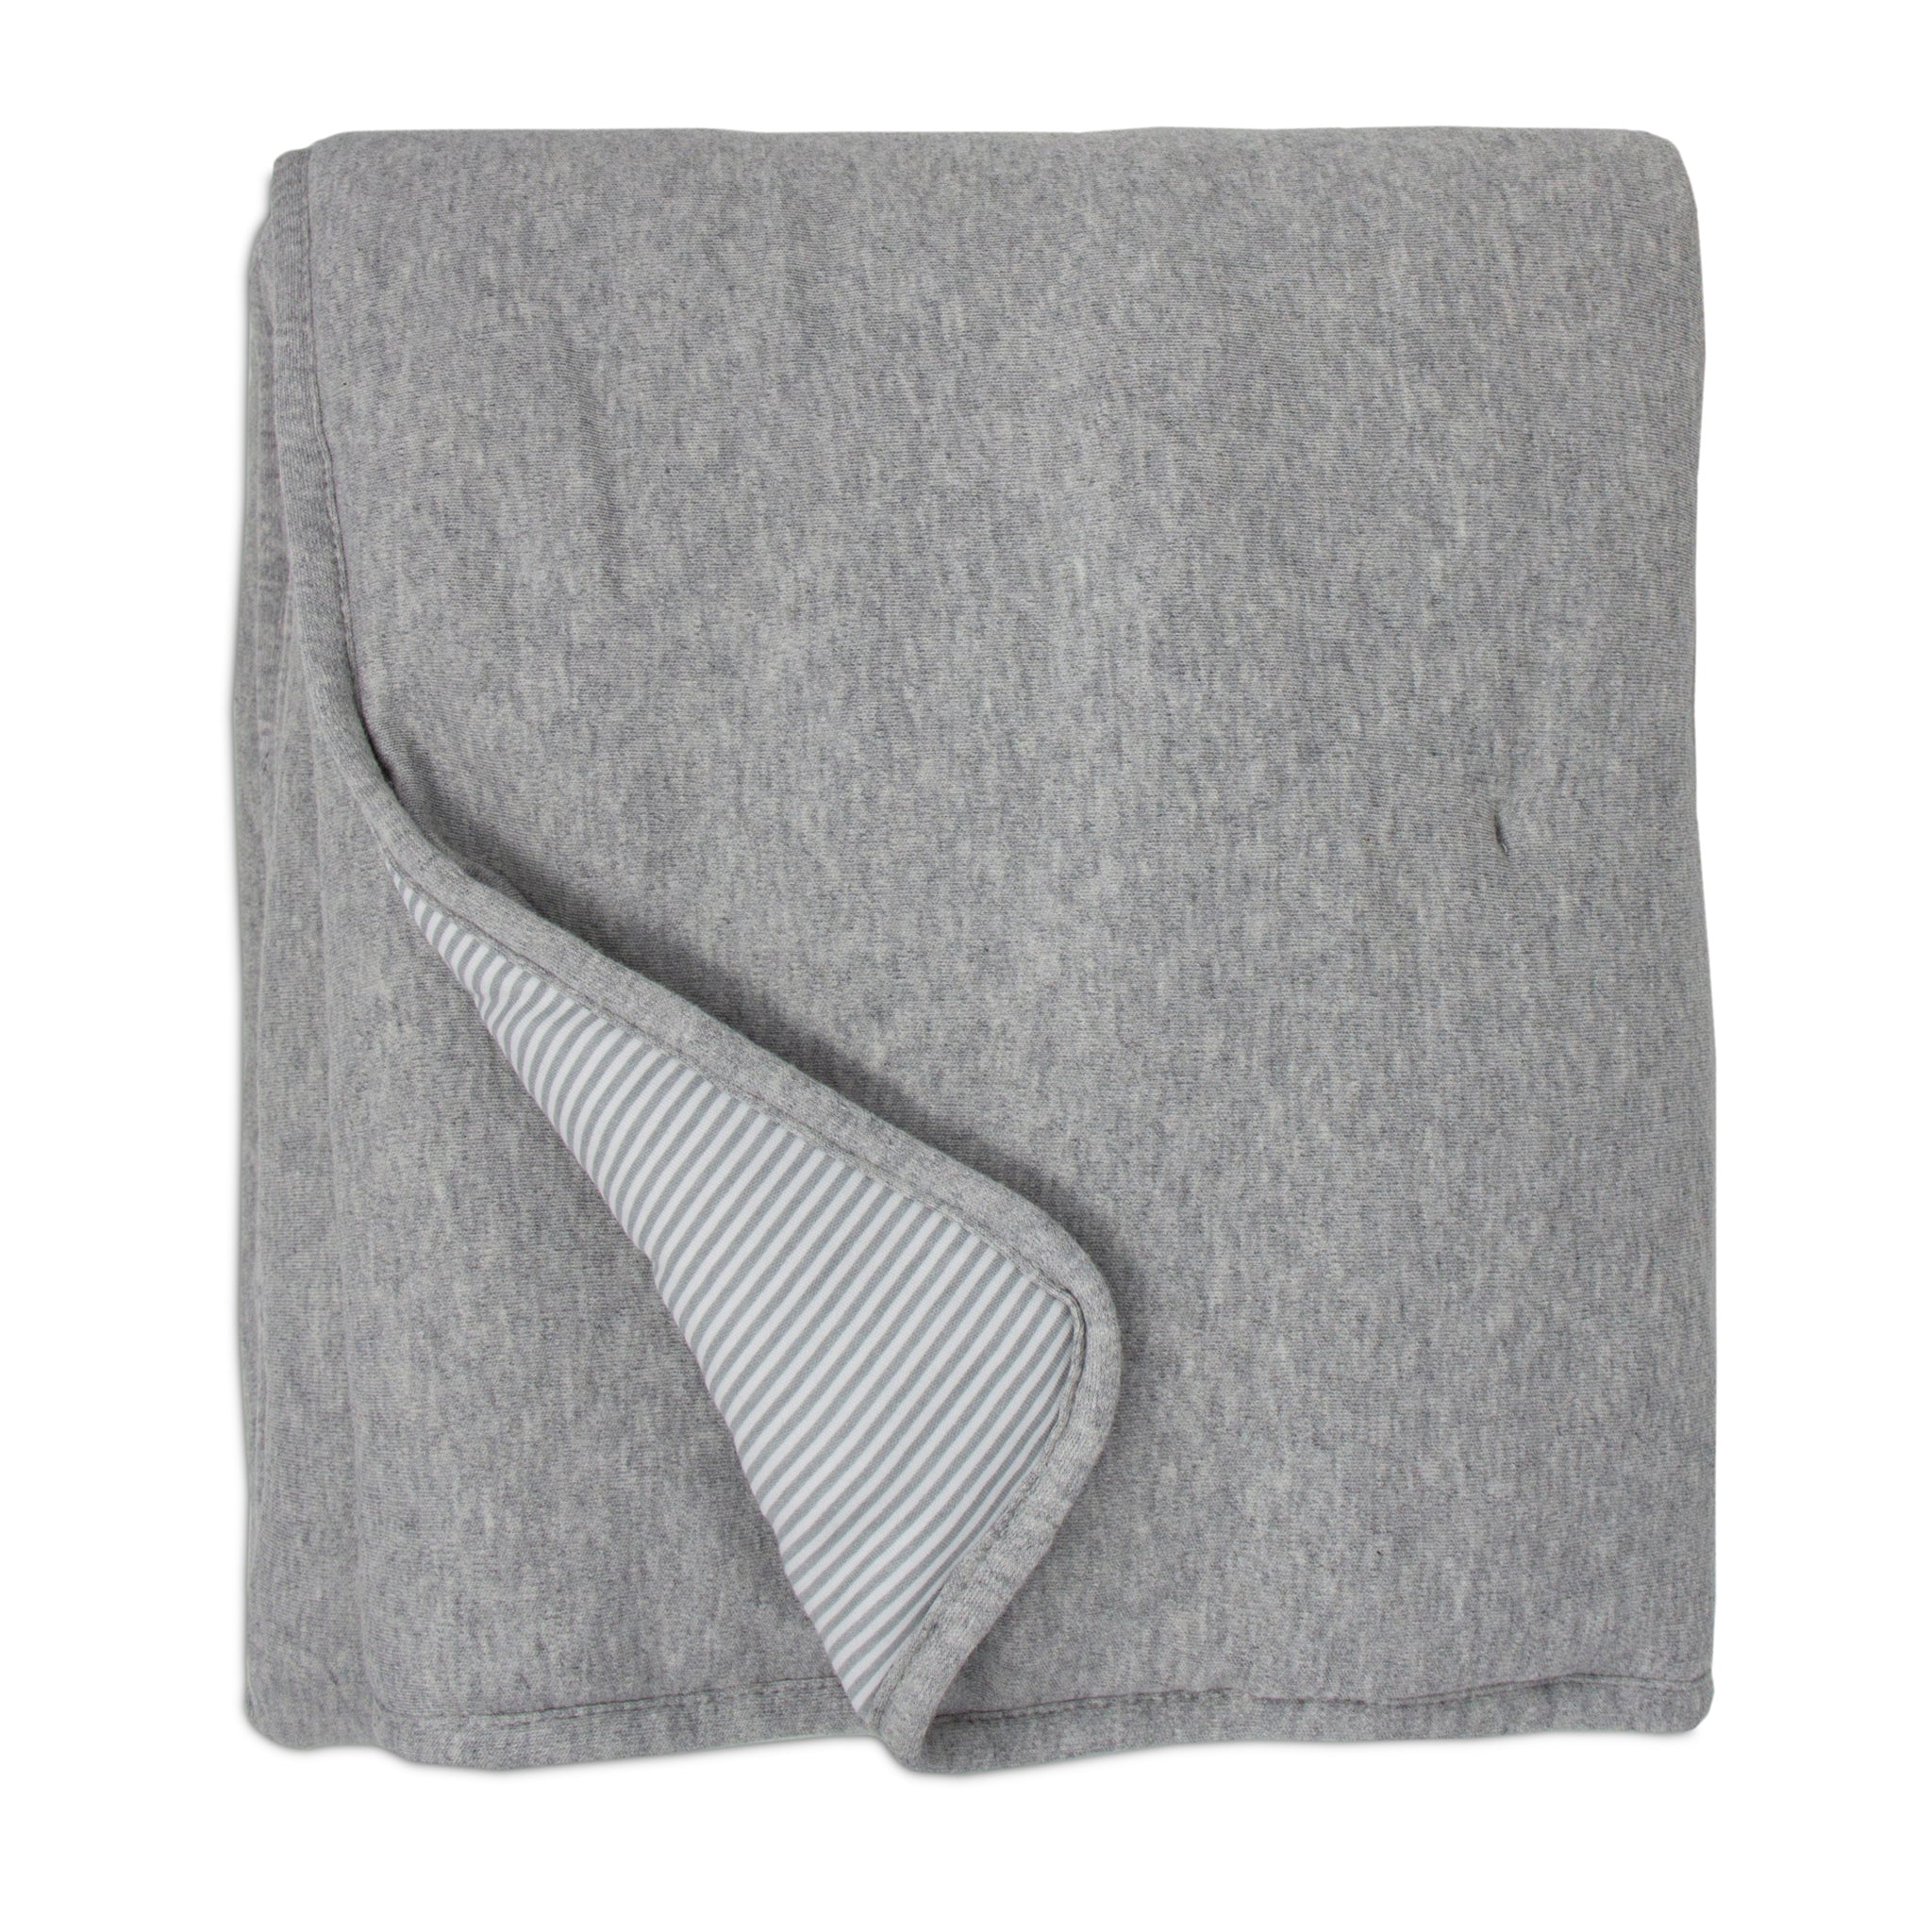 Quilted Comforter - Grey Marl + Grey Heathered Stripes – Living Textiles Co